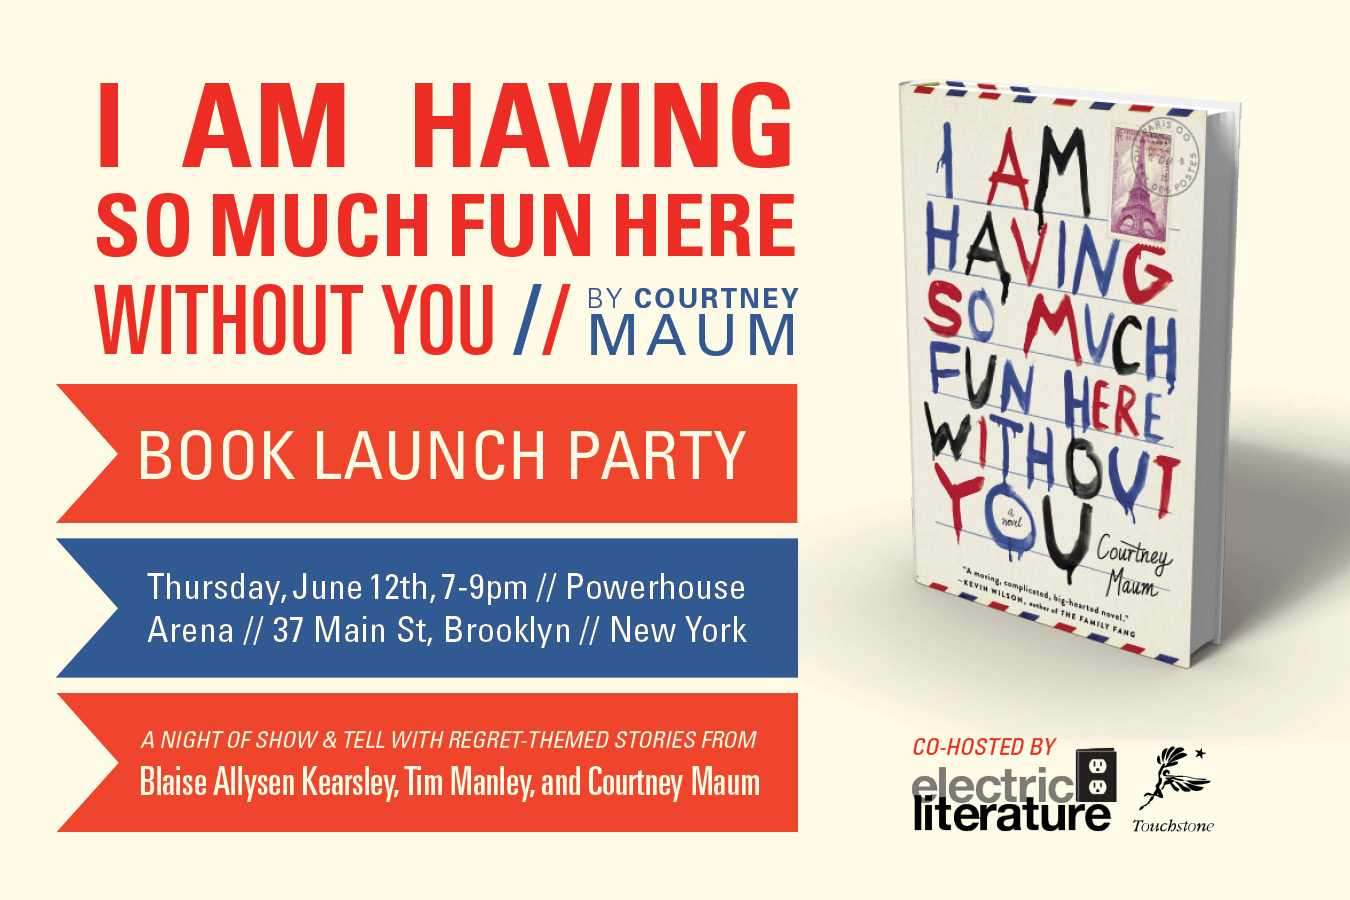 Book Launch: I Am Having So Much Fun Here Without You by Courtney Maum, with Blaise Allysen Kearsley and Tim Manley, co-hosted by Electric Literature